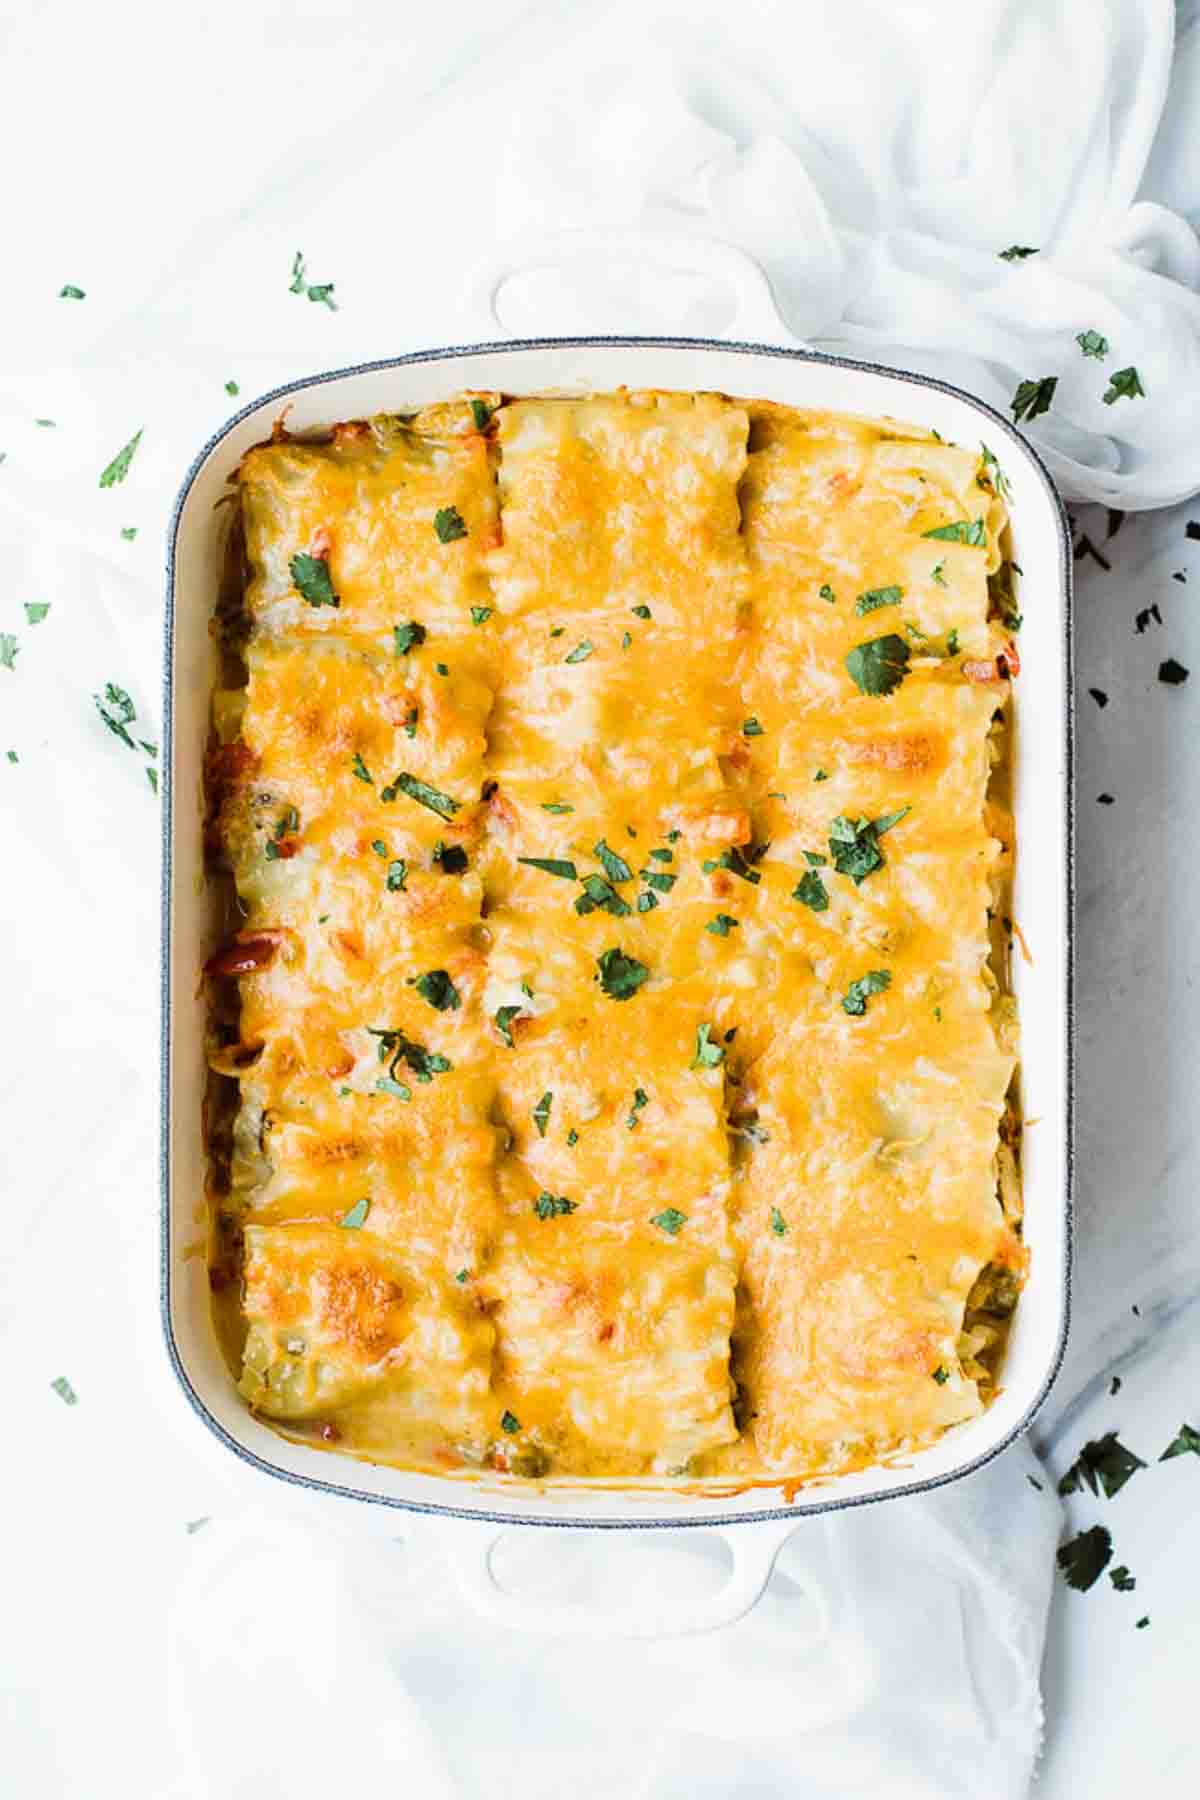 Chicken lasagna roll ups in large pan with melted cheese on top.